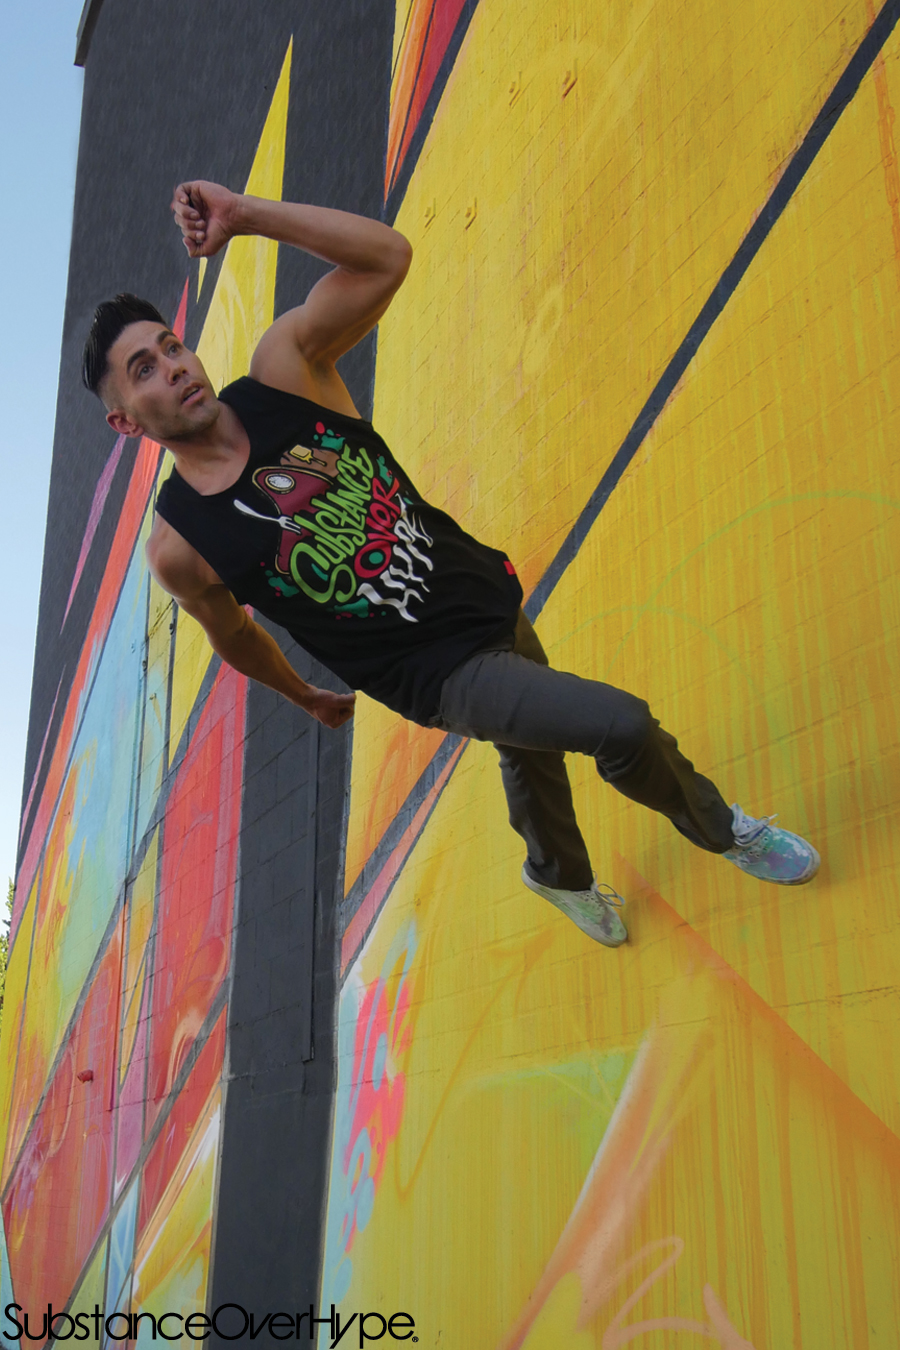 Running on a wall :)